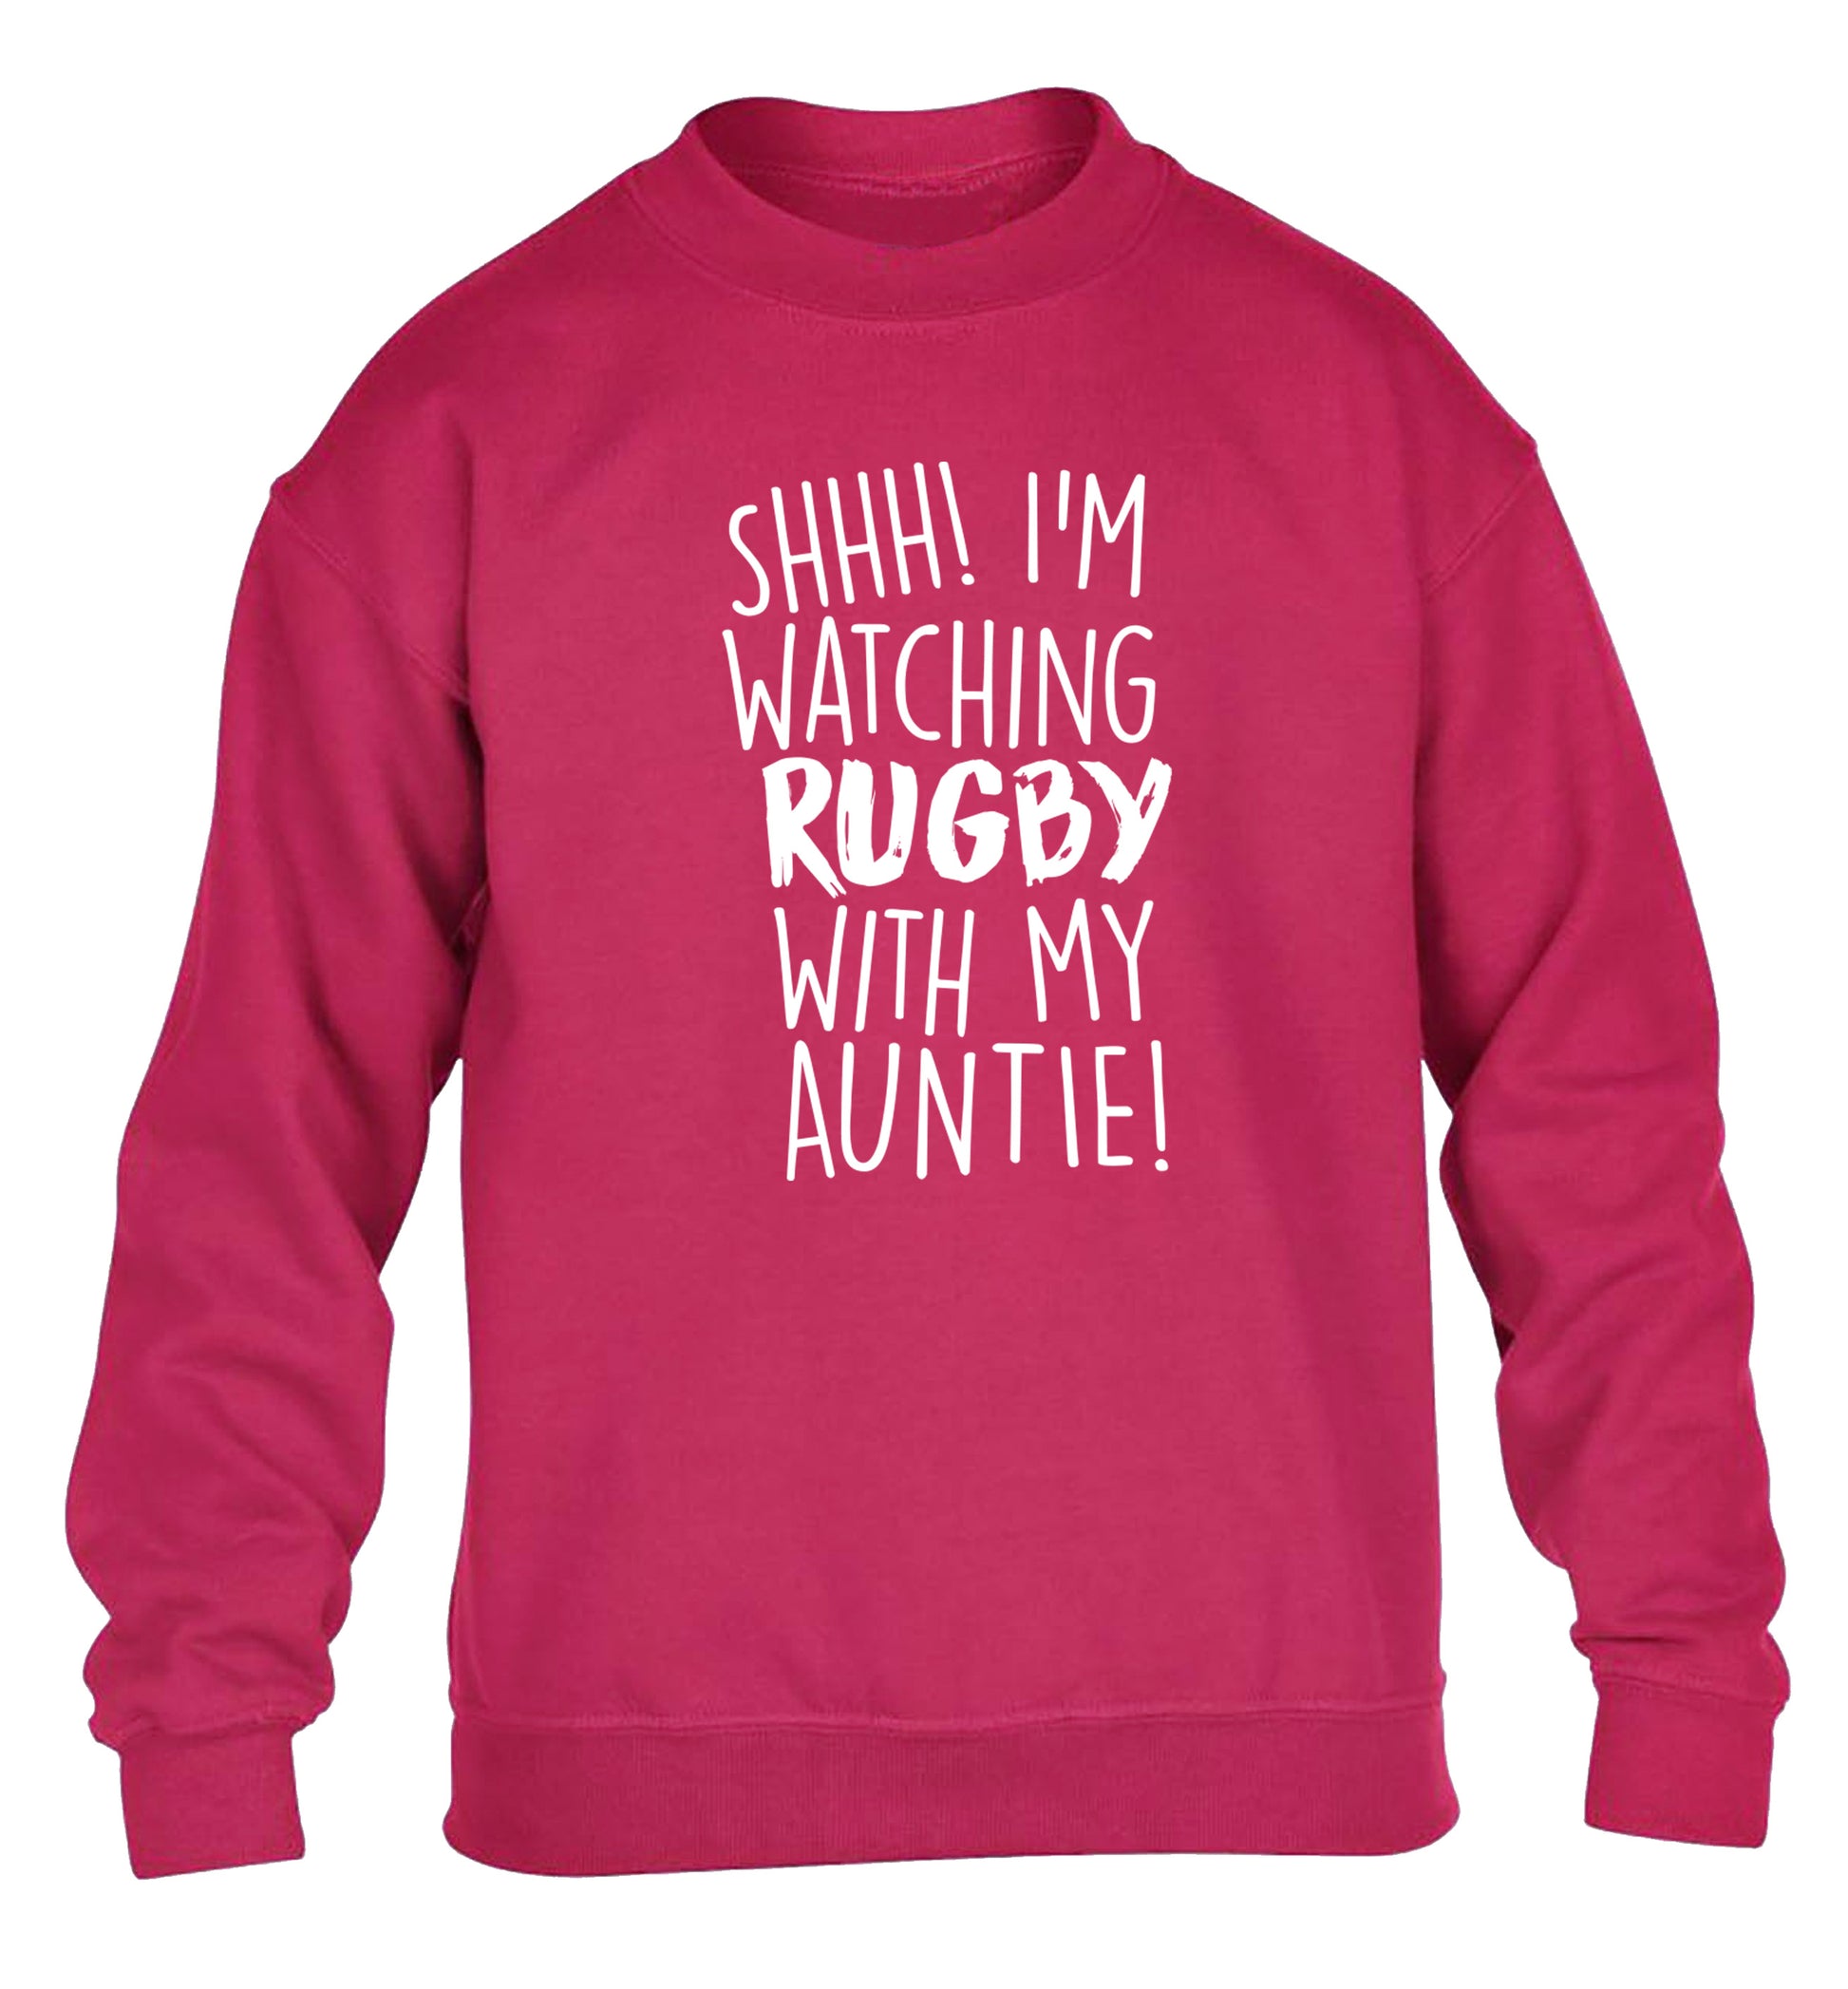 Shhh I'm watchin rugby with my auntie children's pink sweater 12-13 Years